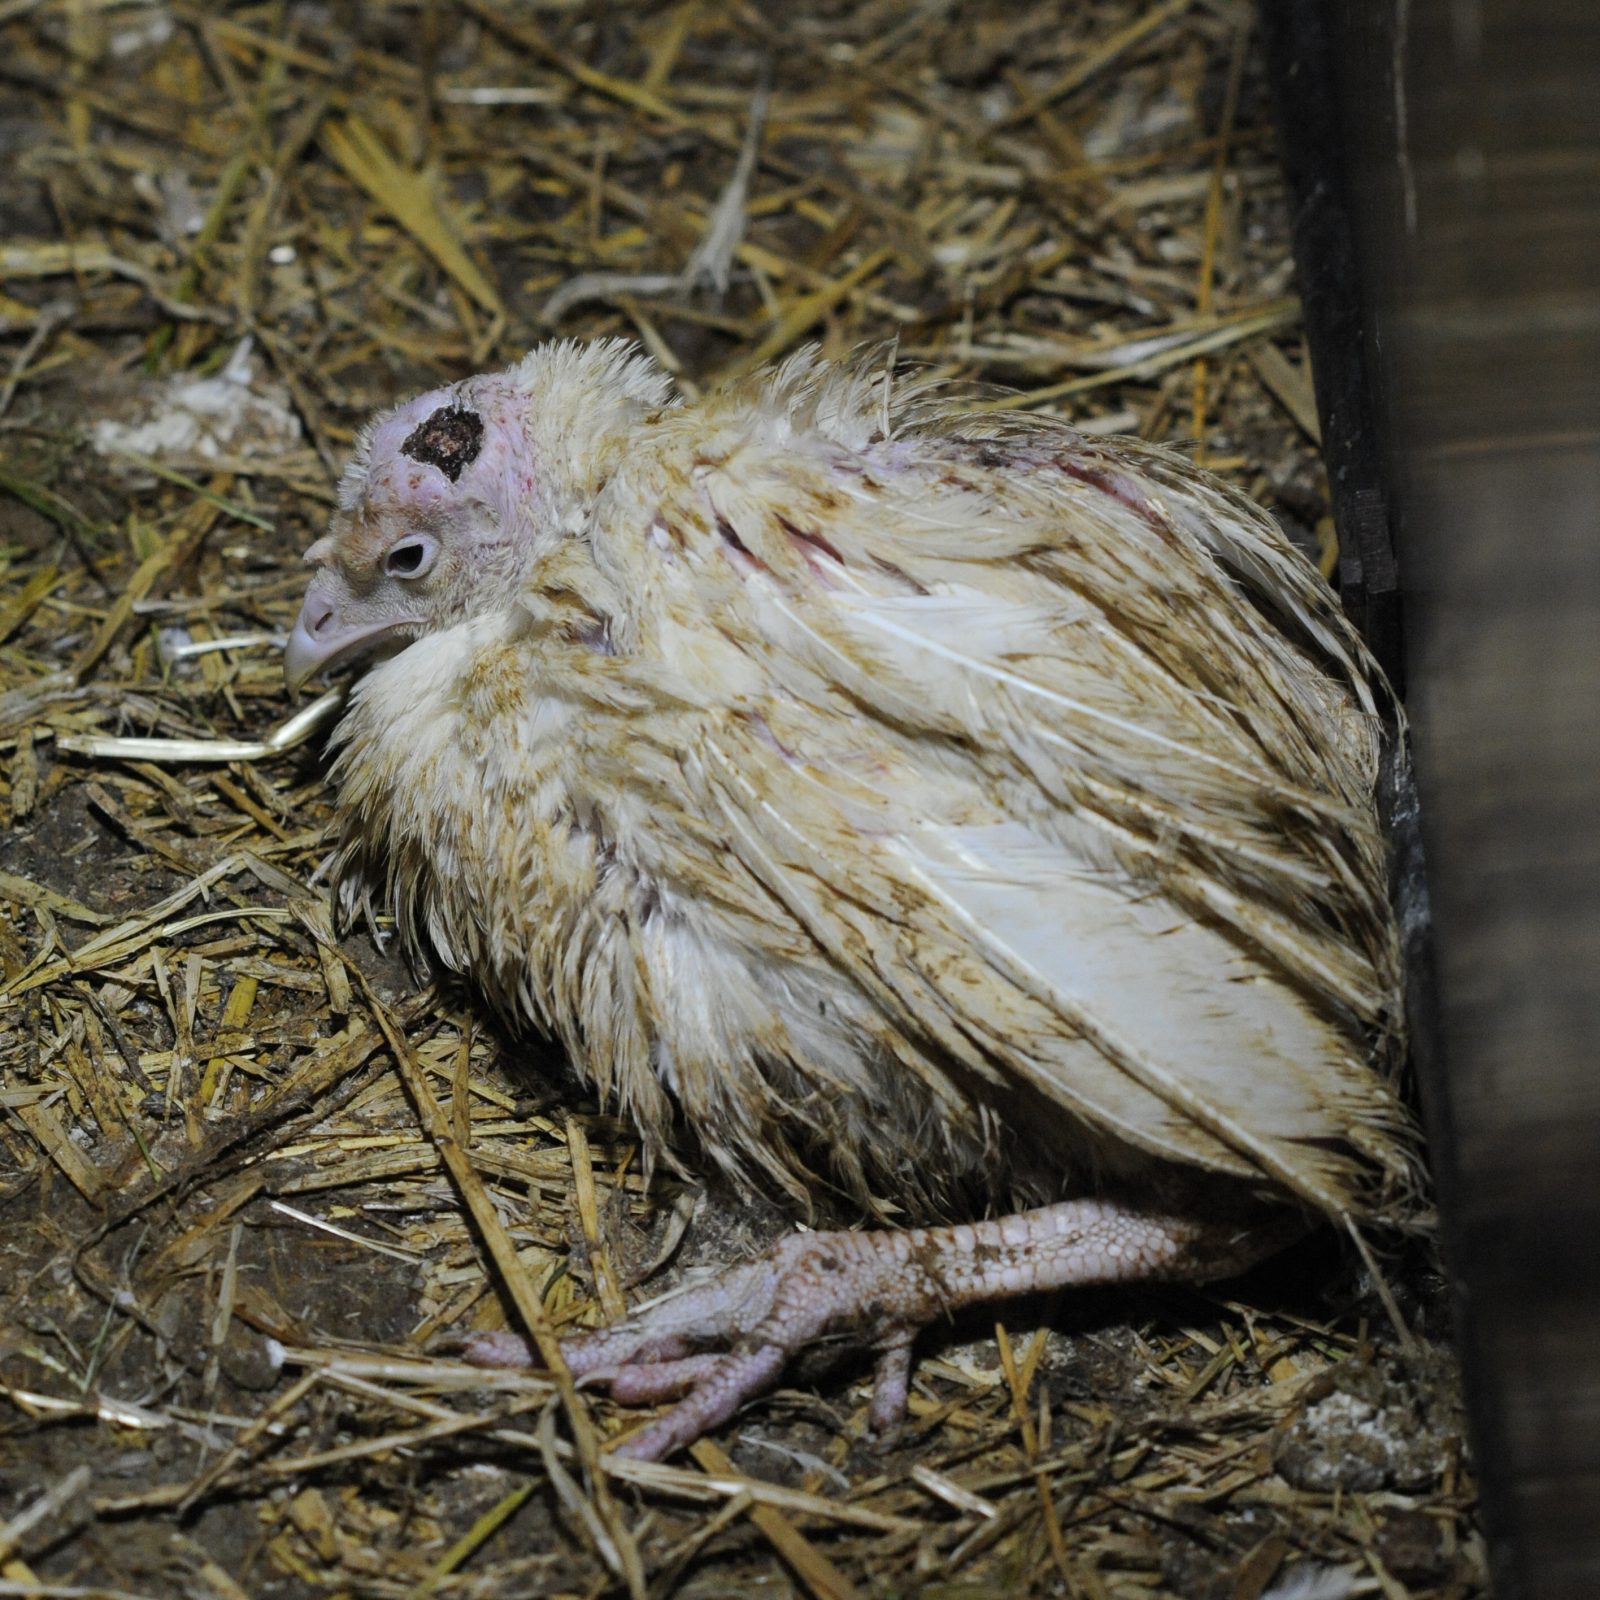 A turkey suffering from injury and infection on a factory farm.